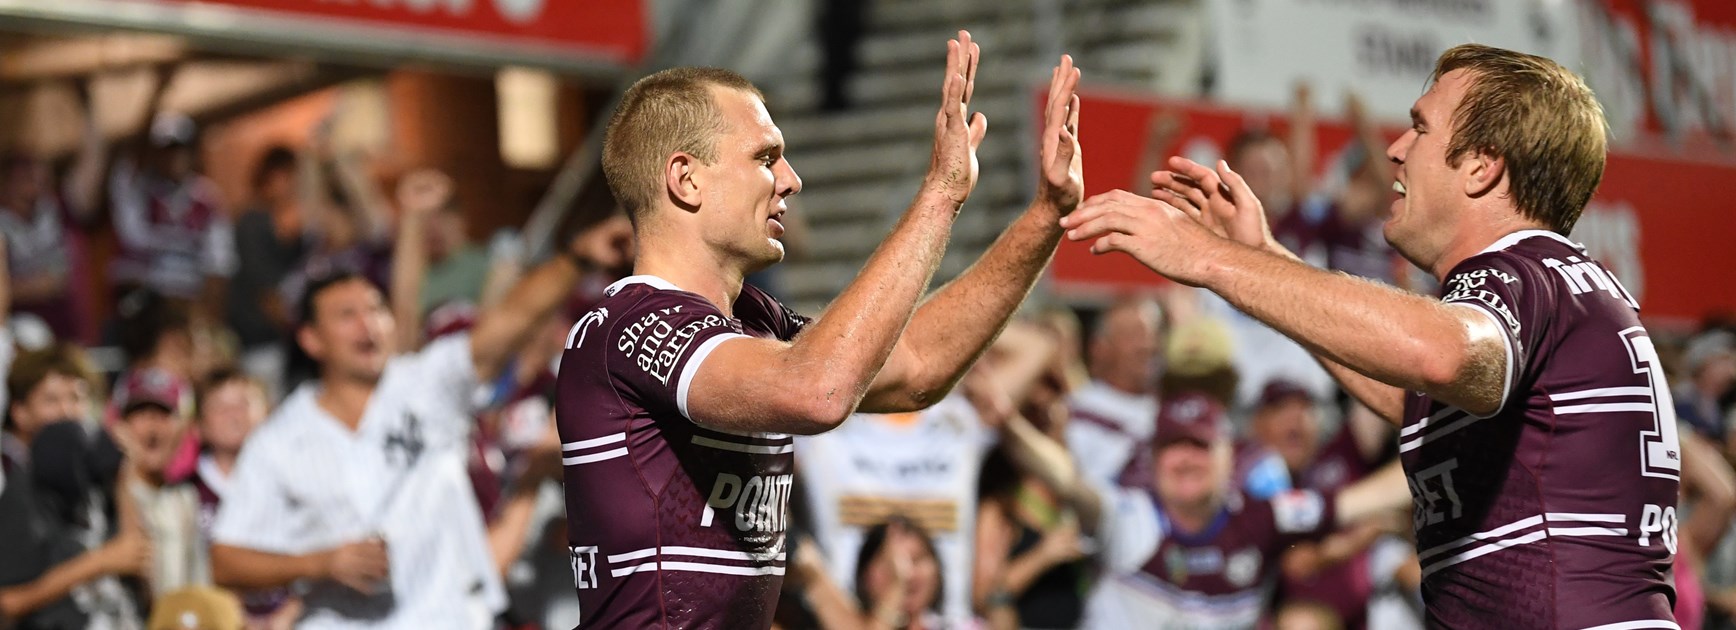 The Points That Count: Sea Eagles vs Storm